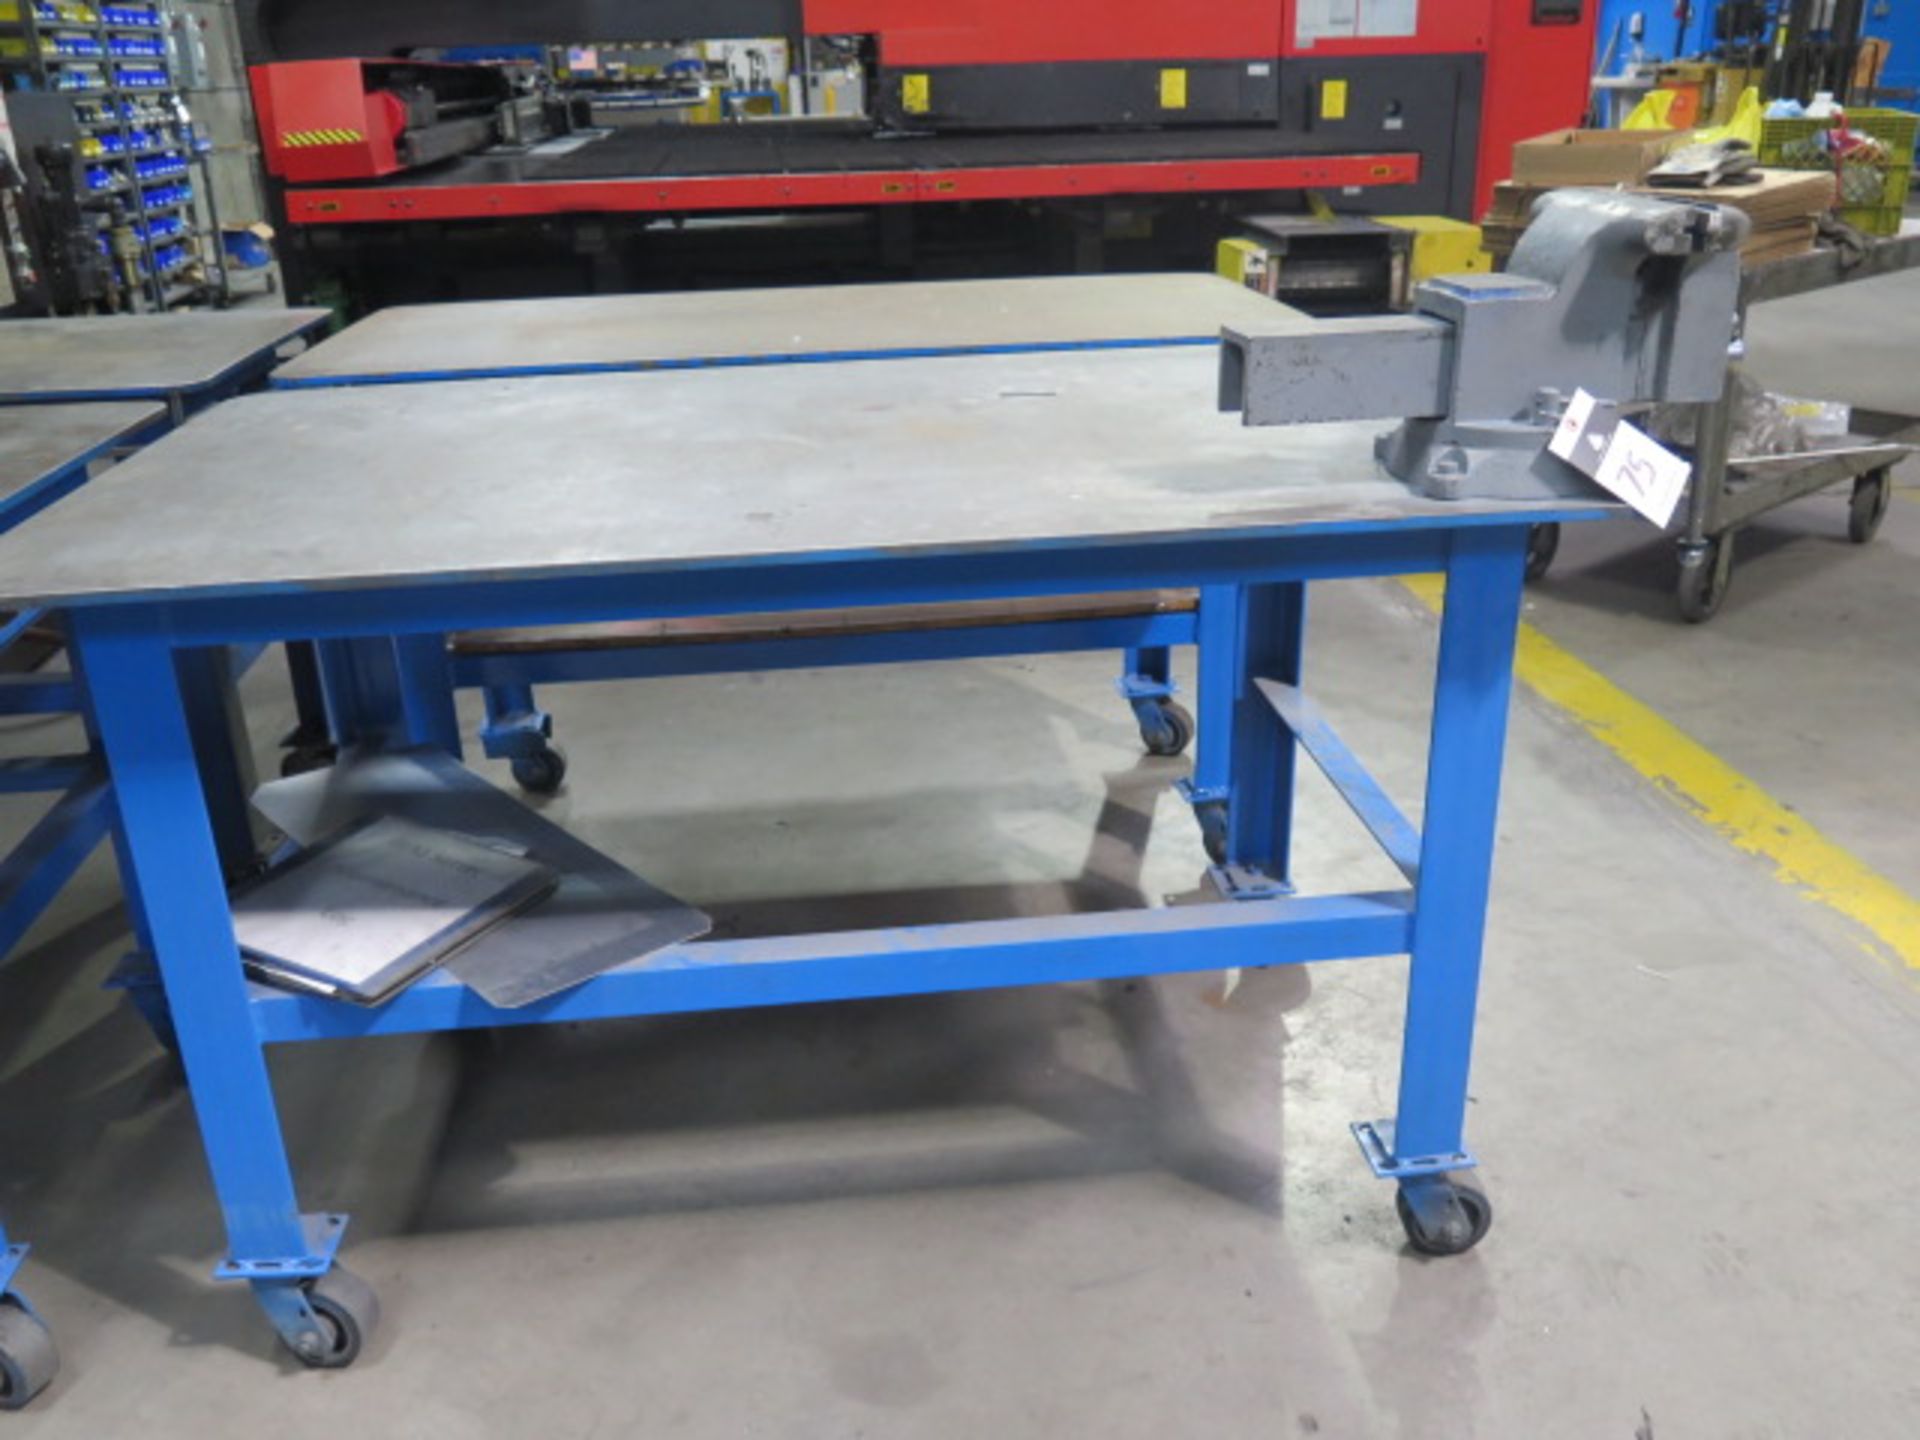 36" x 60" Rolling Welding Table w/ Wilton 8" Bench Vise - Image 2 of 3